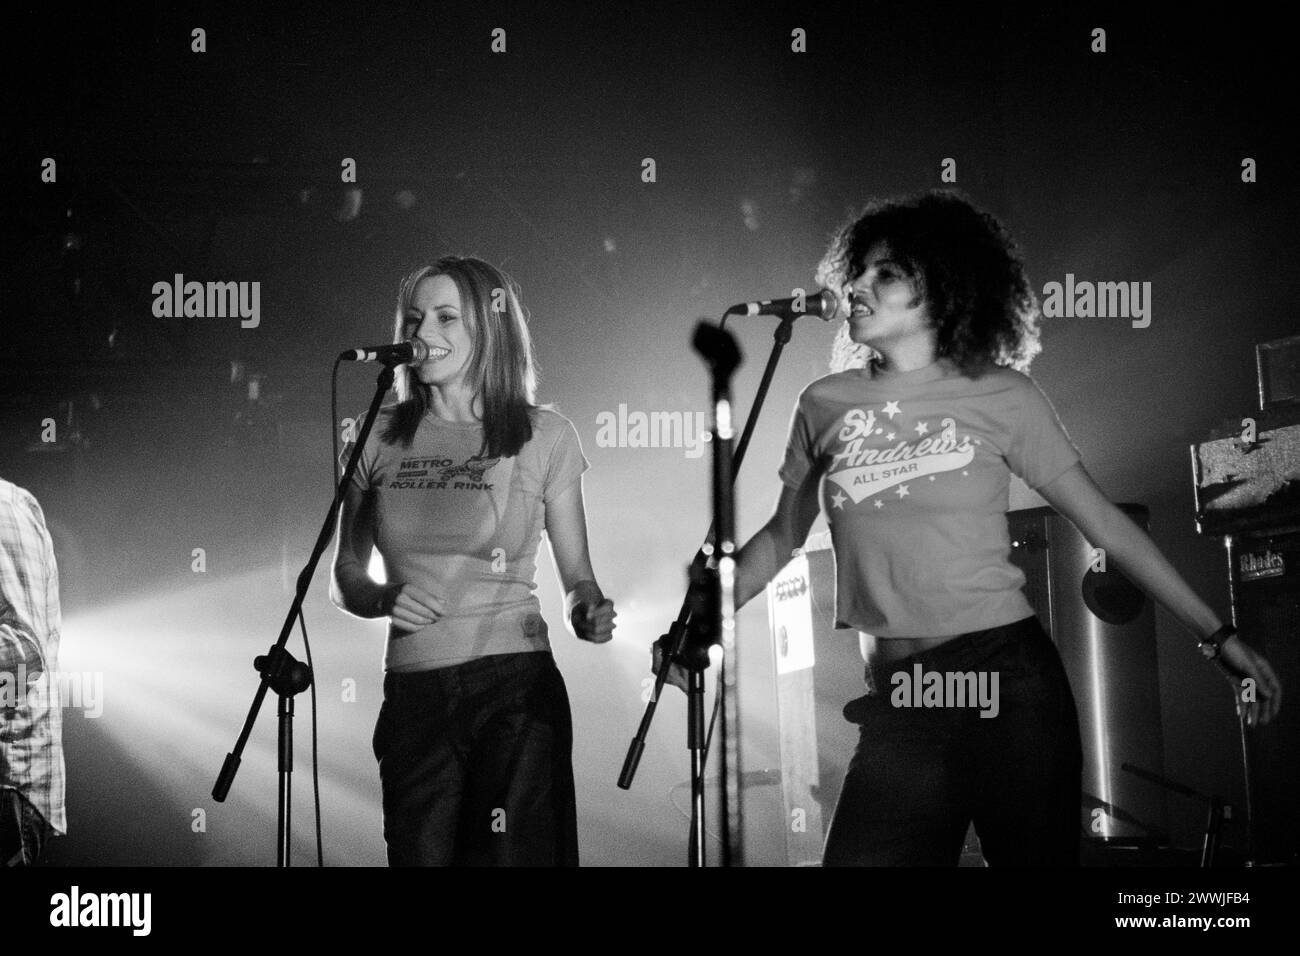 BACKING SINGERS, SEMISONIC, 2001: The backing singers for the Minneapolis band Semisonic playing live at Cardiff International Arena CIA in Cardiff, Wales, UK on 14 February 2001.  Photo: Rob Watkins. INFO: Semisonic, an American rock band formed in 1995 in Minneapolis, Minnesota, gained fame with hits like 'Closing Time.' Their infectious melodies and introspective lyrics resonate with audiences around the world. Stock Photo